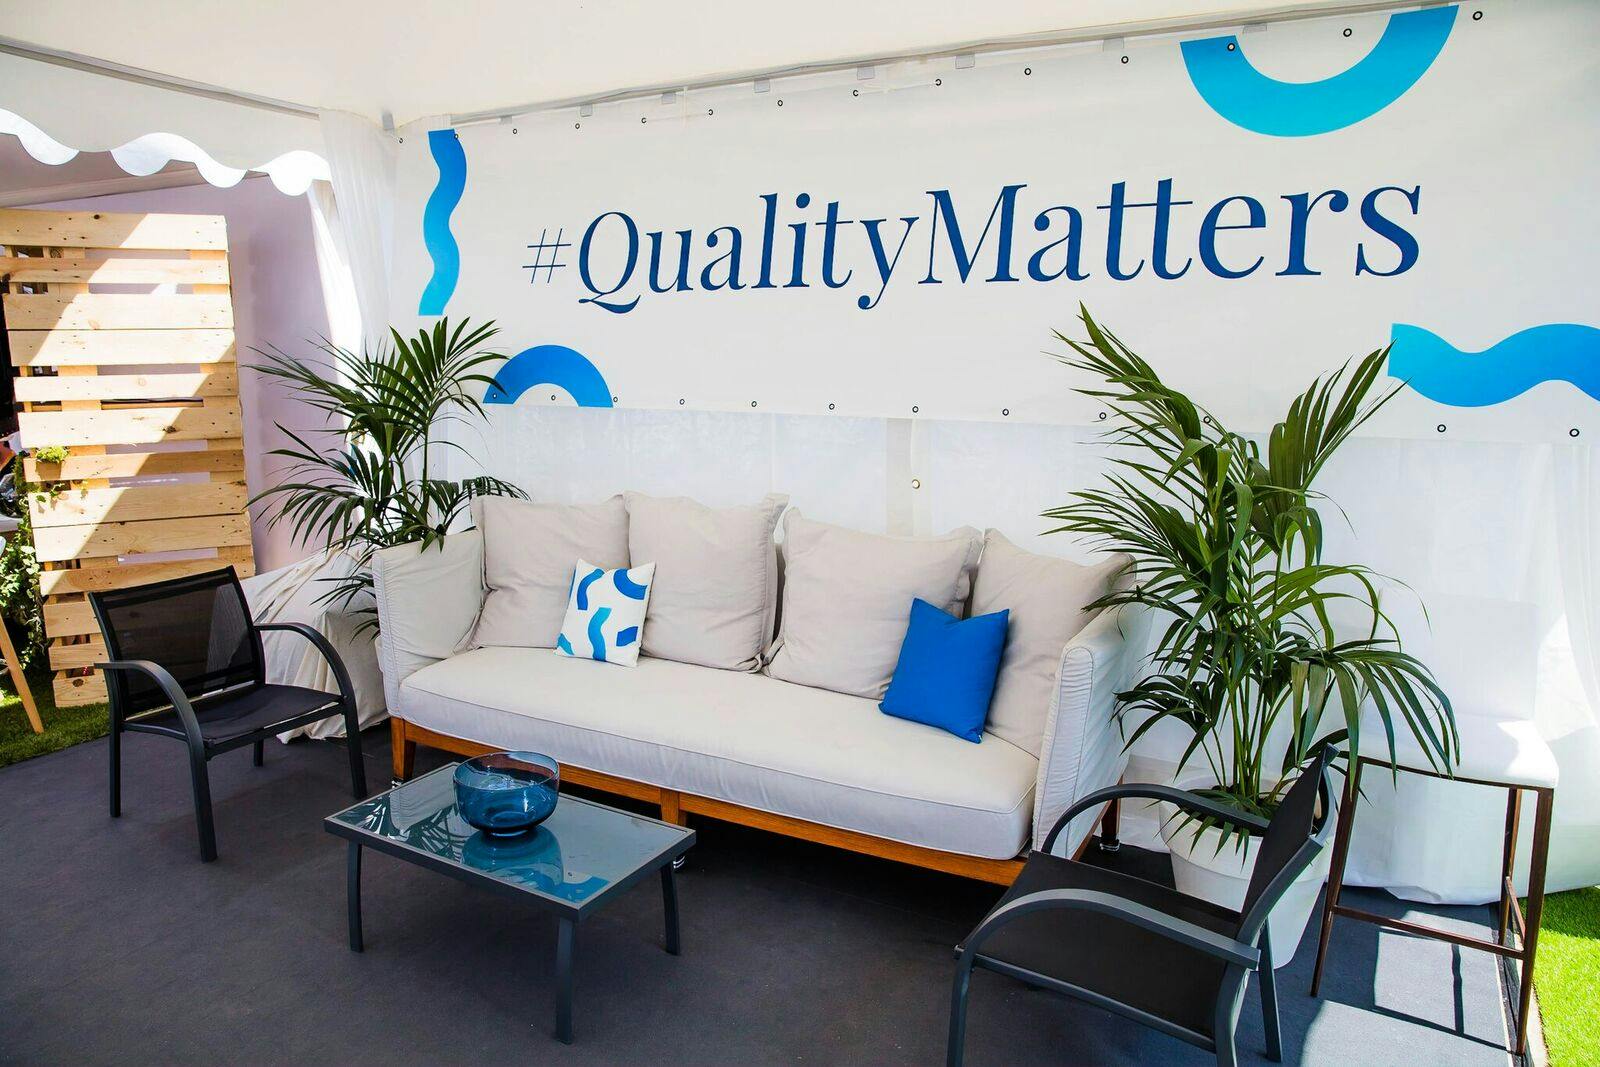 Quality Matters - 2017 OpenX Cannes Lions